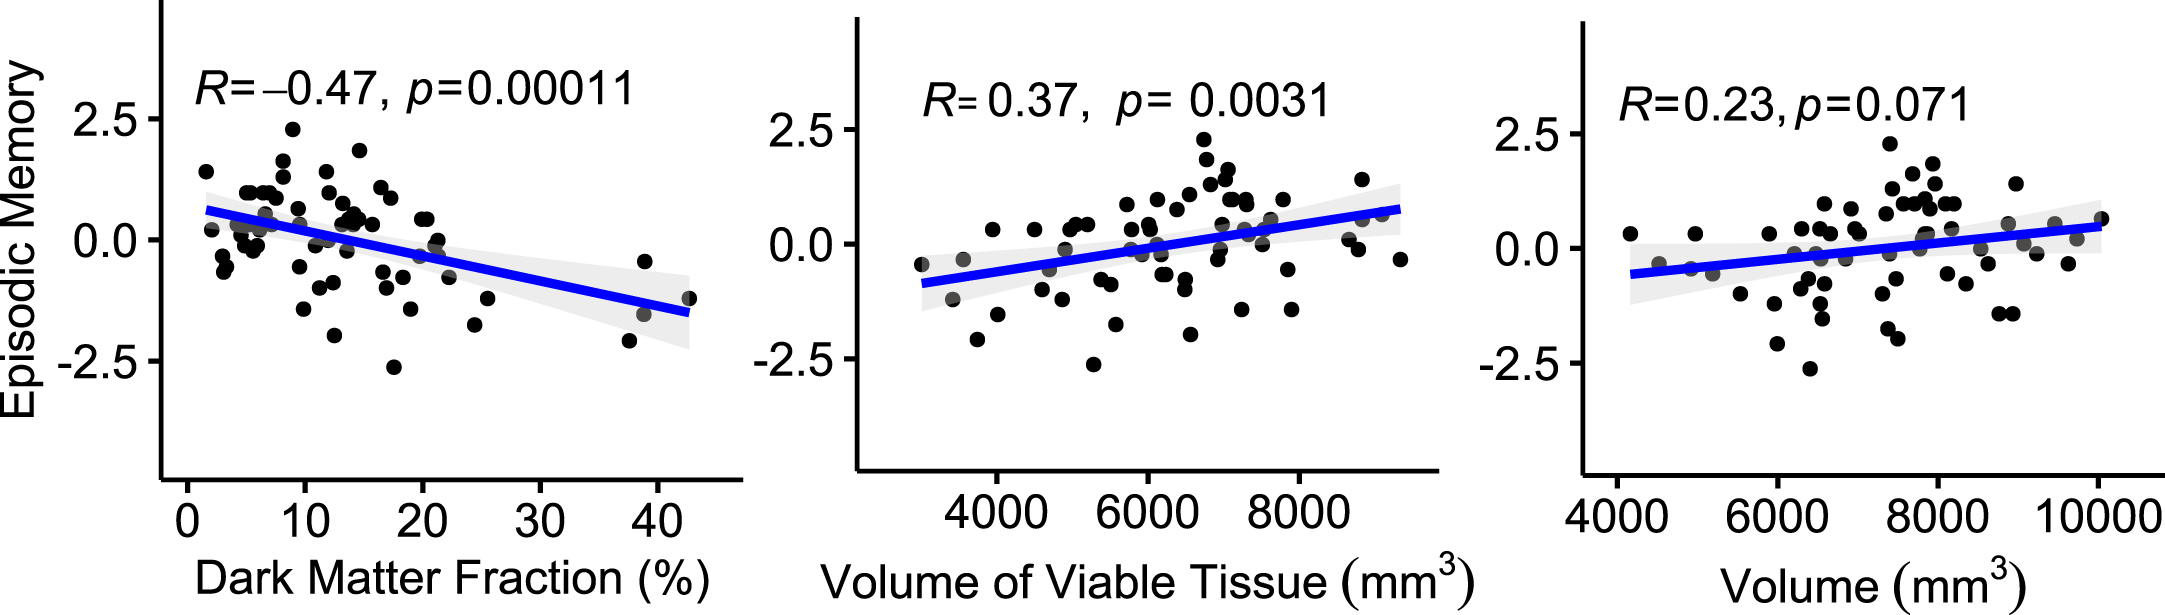 Correlation of the Episodic Memory test (represented by the z-score of the Free and Cued Selective Reminding Test) with the fraction of Dark Matter, volume of Viable Tissue, and Total Volume of the hippocampus. Each point represents an individual participant, solid lines represent linear regression, and shaded areas are 95% confidence intervals. Additionally, individual cognitive data are presented in Supplementary Figure 2.